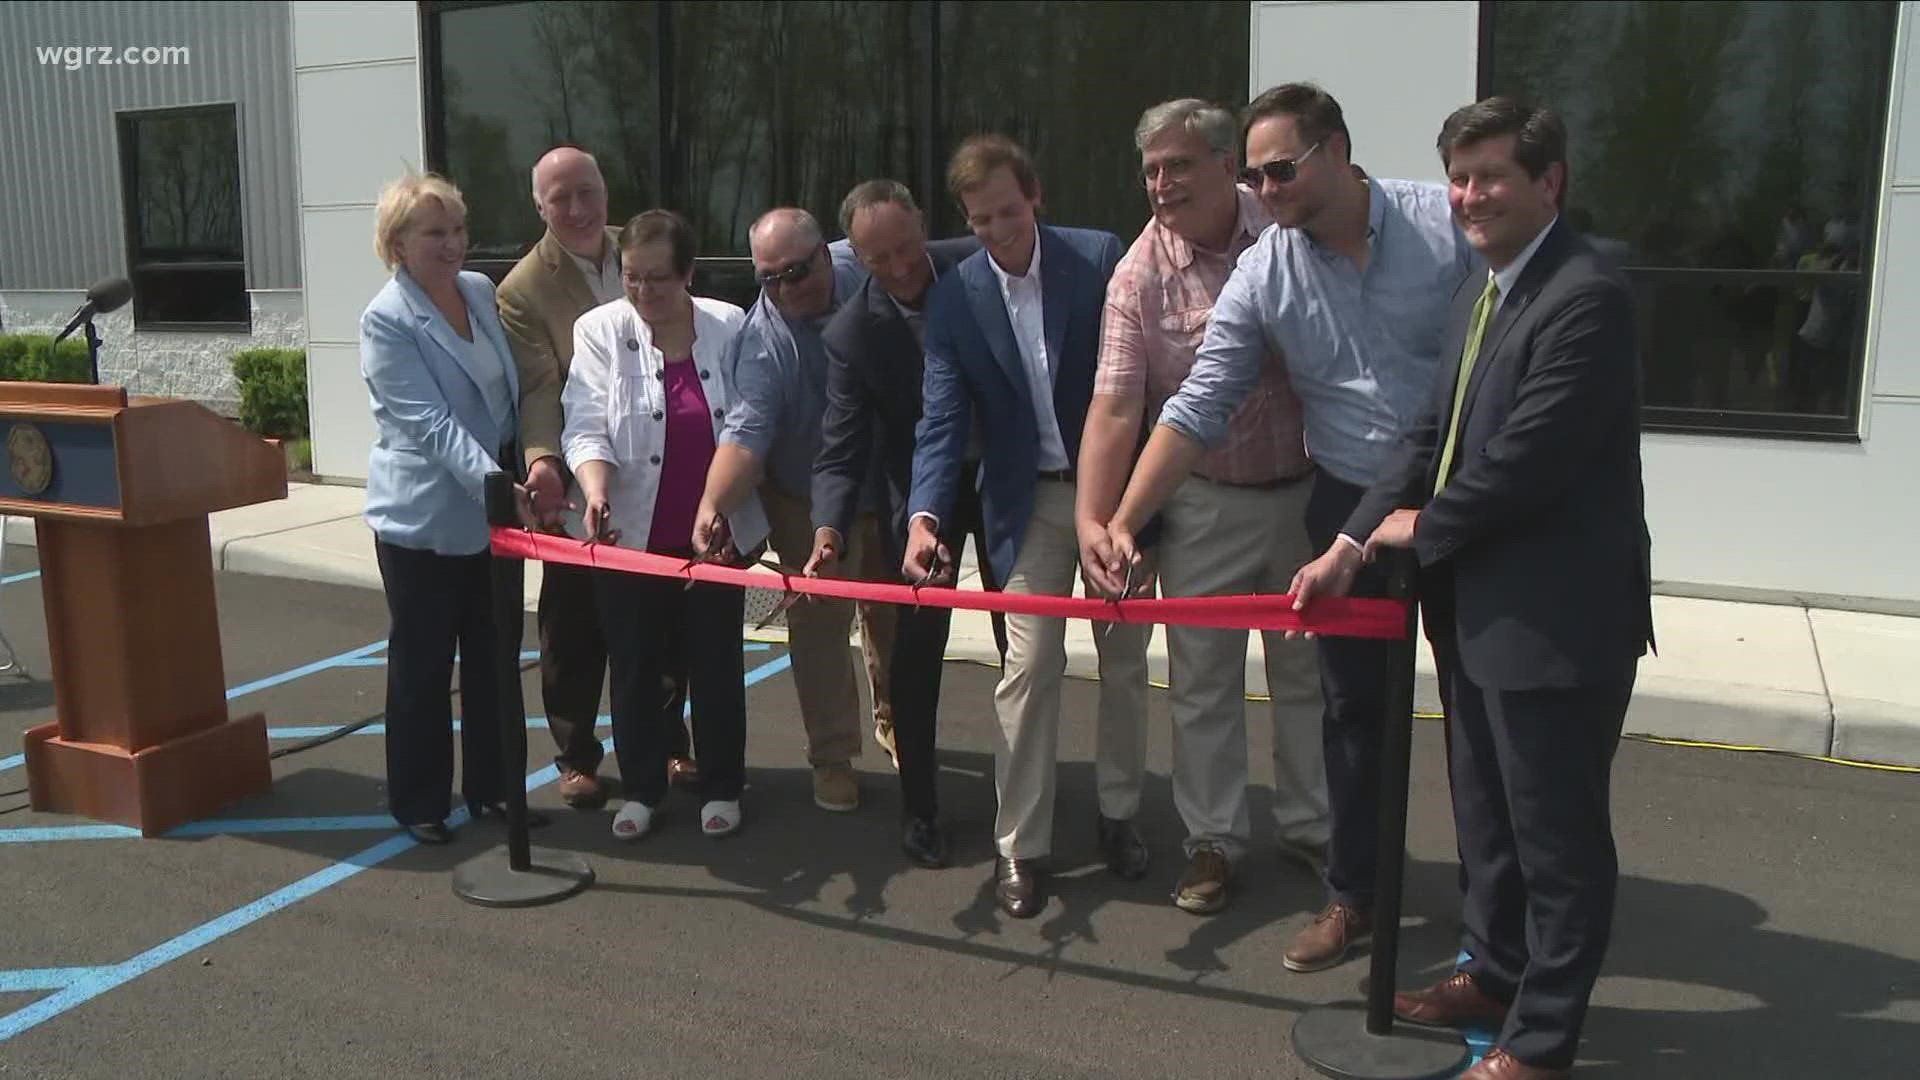 For years the site of the former Bethlehem Steel plant was an eyesore along route 5, but today there was an official ribbon cutting for a new business.